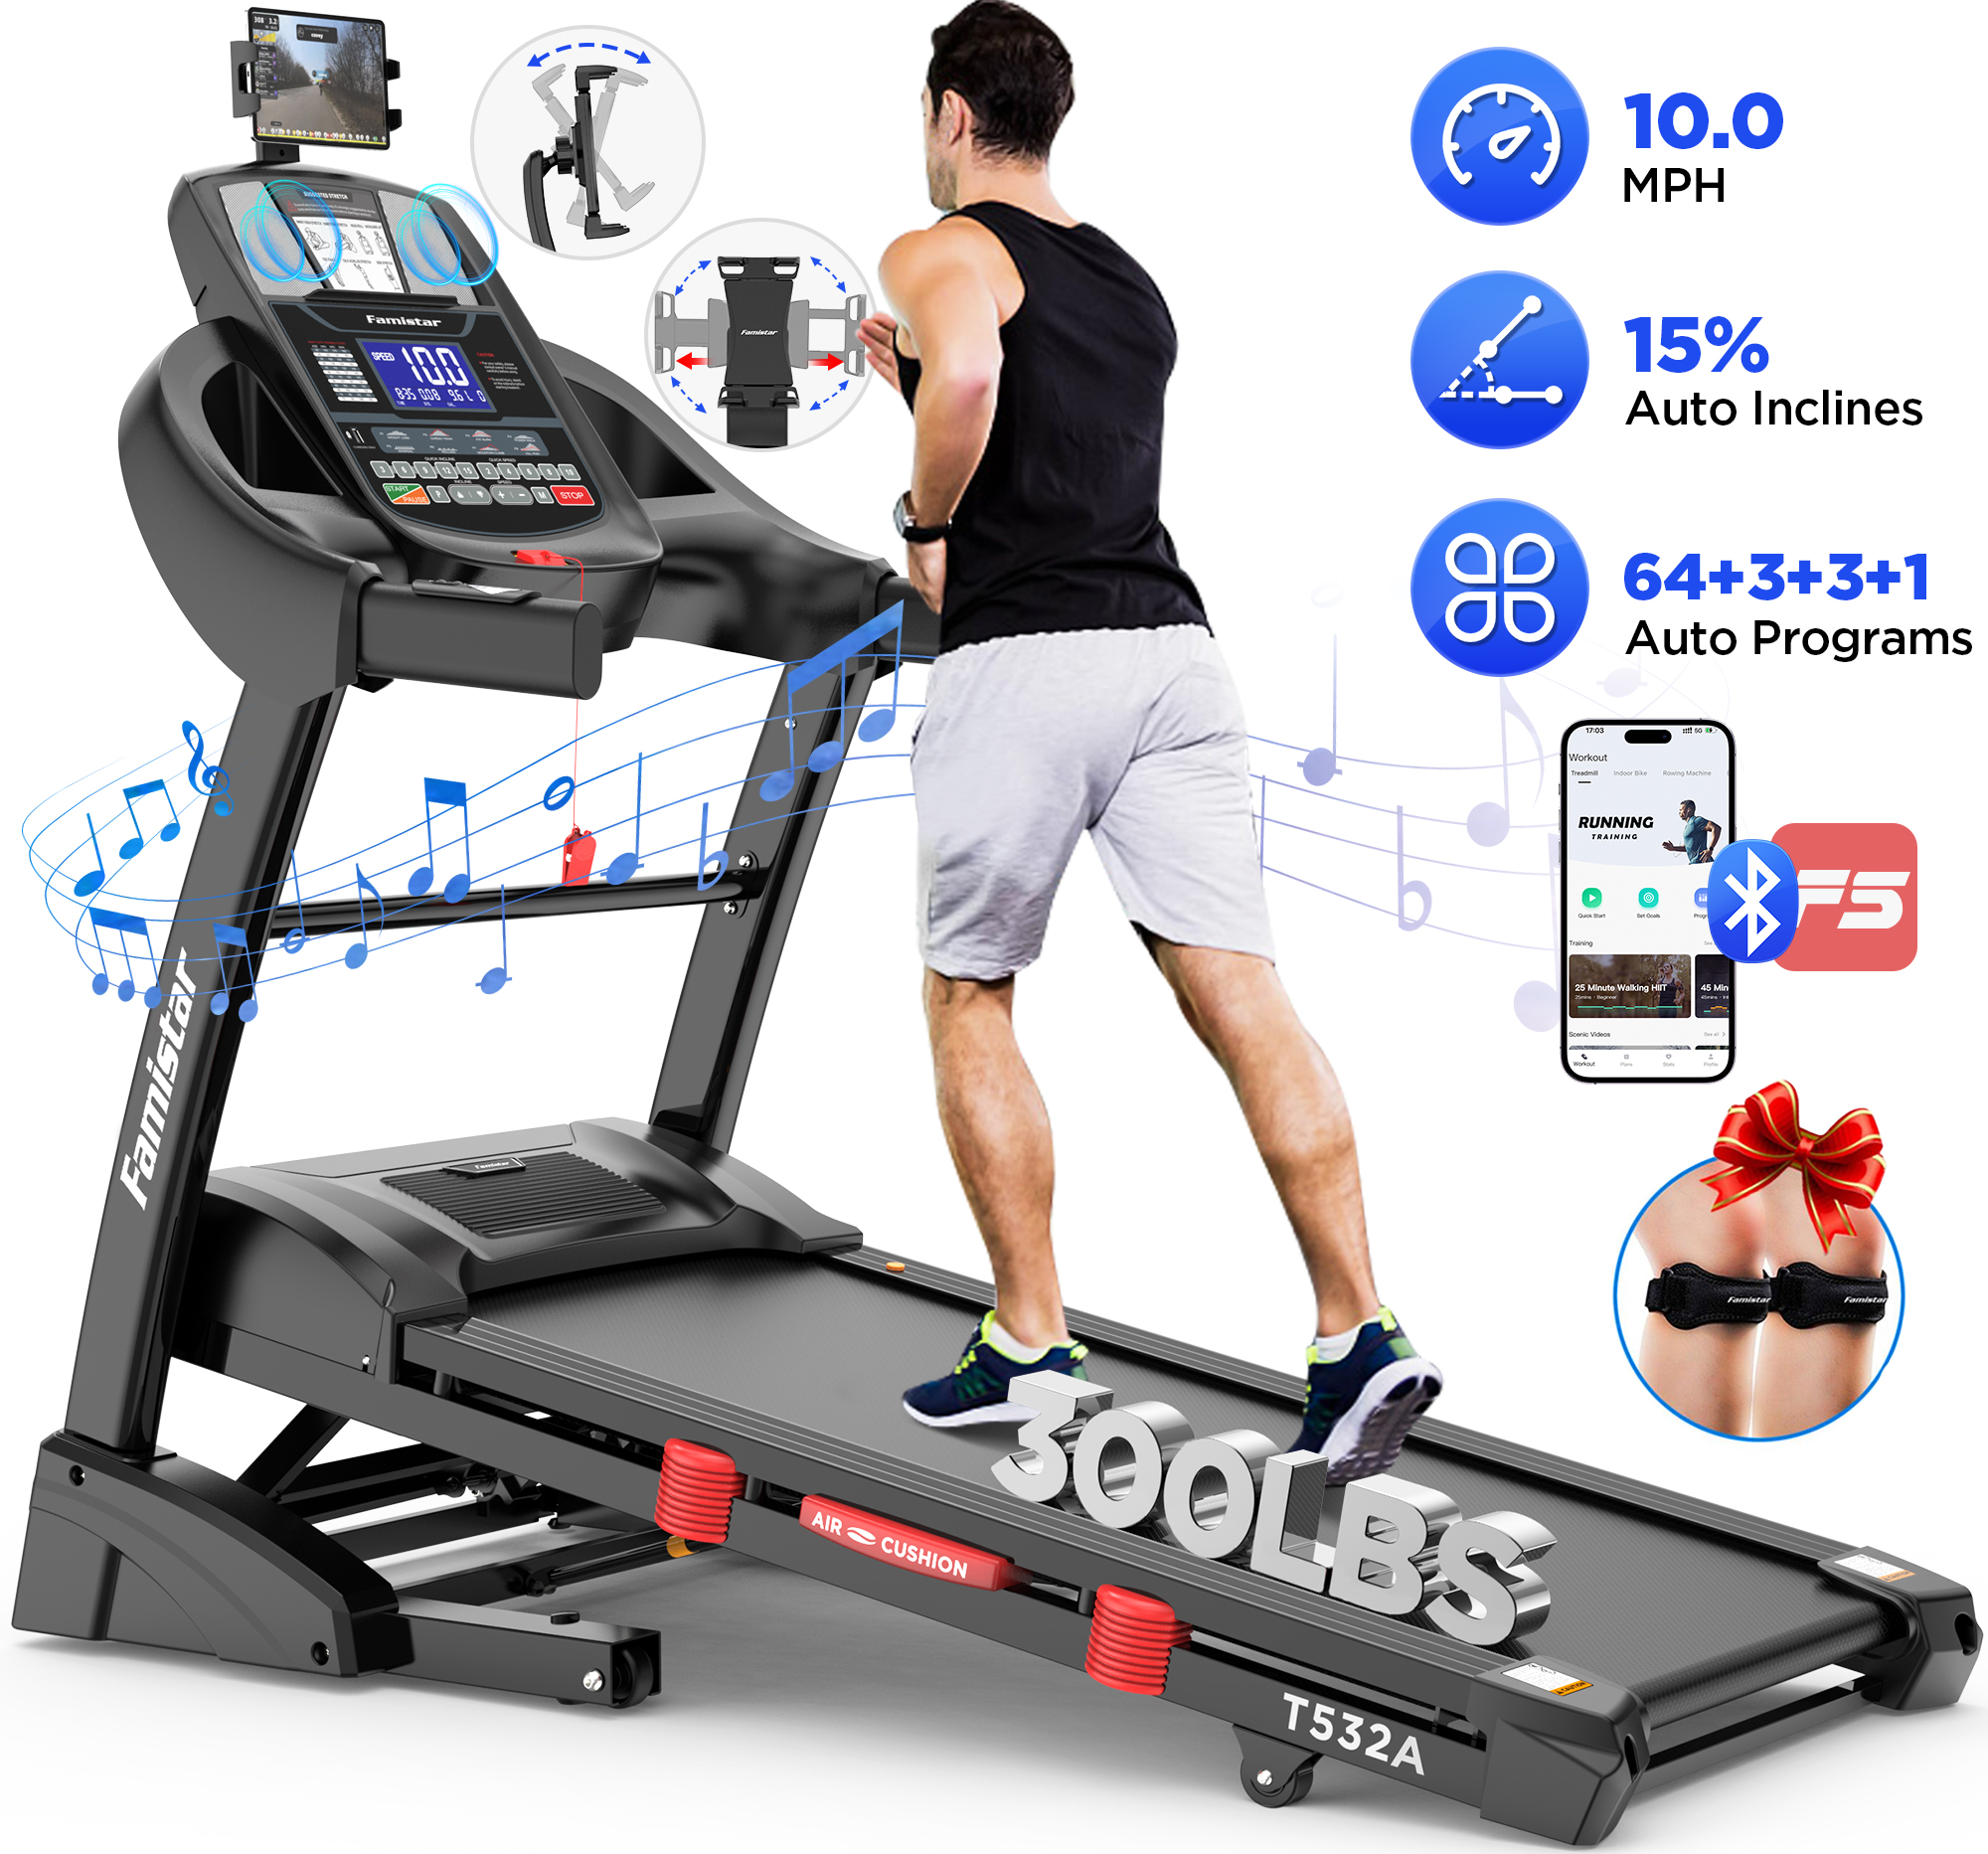 Famistar 4.5HP Folding Treadmill for Home with 15 Auto Incline, Smart APP, 300lbs, HiFi Bluetooth Speakers, 64 Programs, 10MPH Speed, Foldable EleTreadmill Running Machine, Knee Strap Gift - image 1 of 7